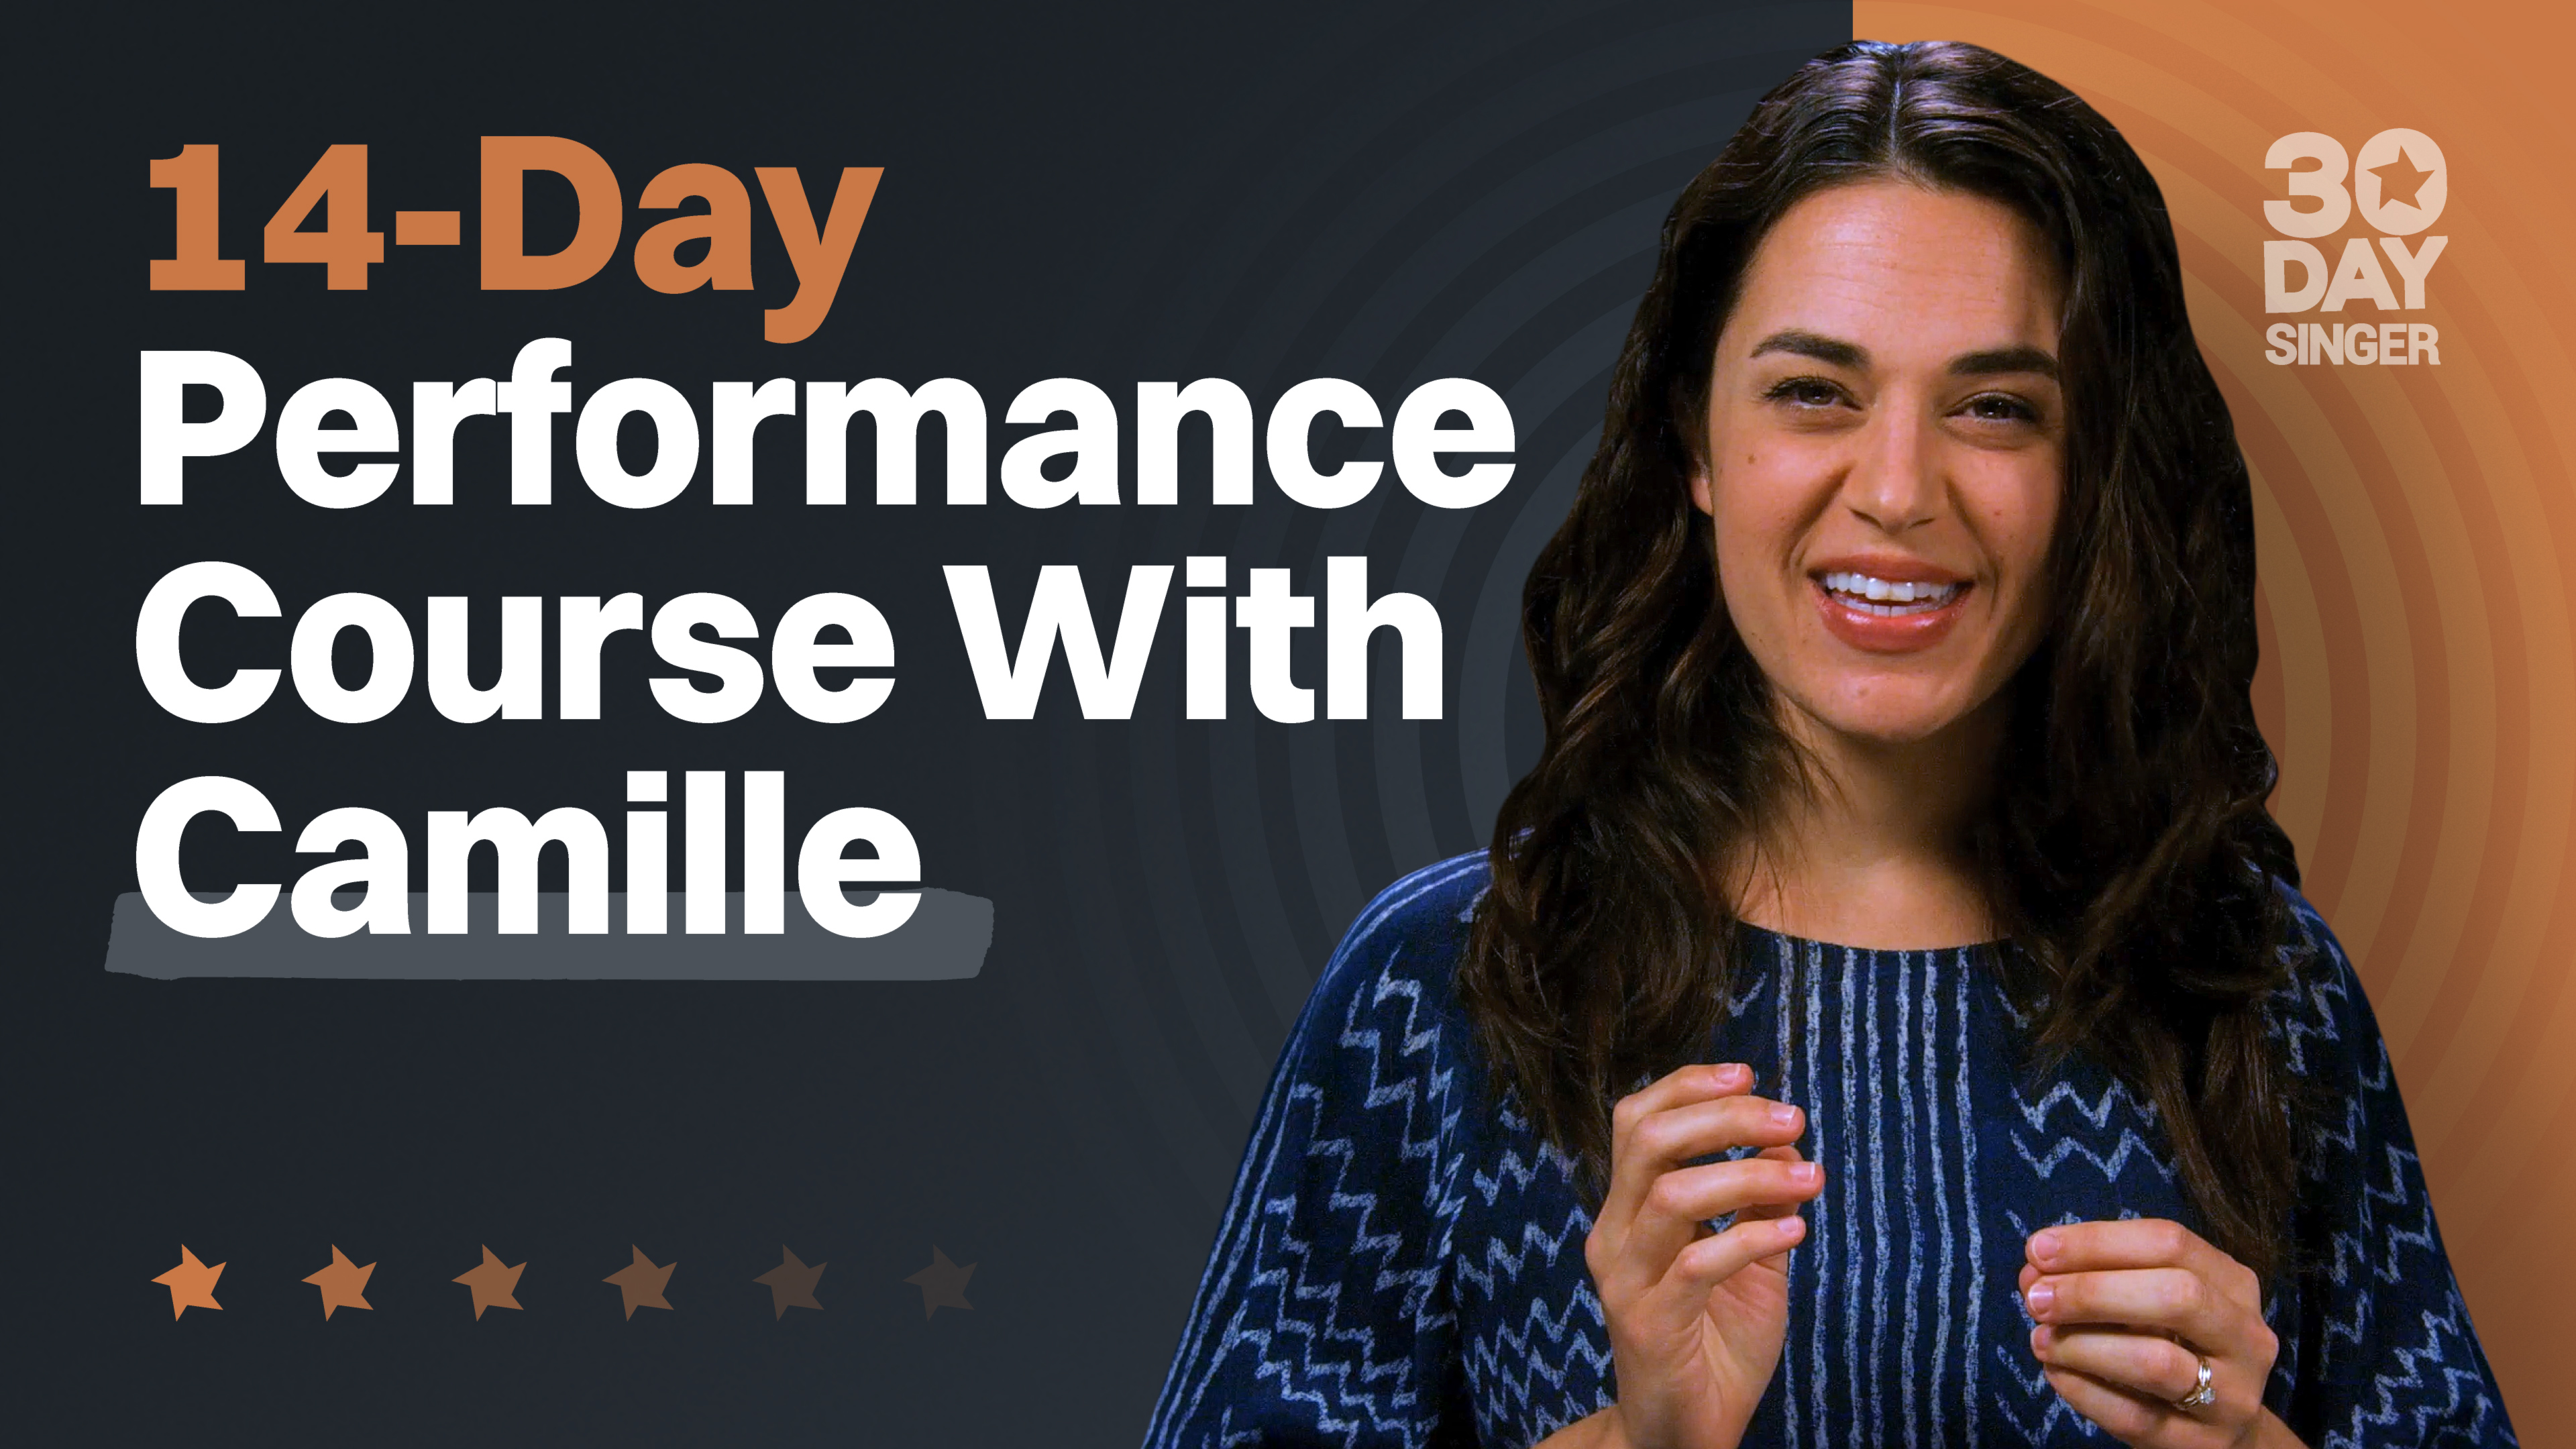 14-Day Performance Course With Camille